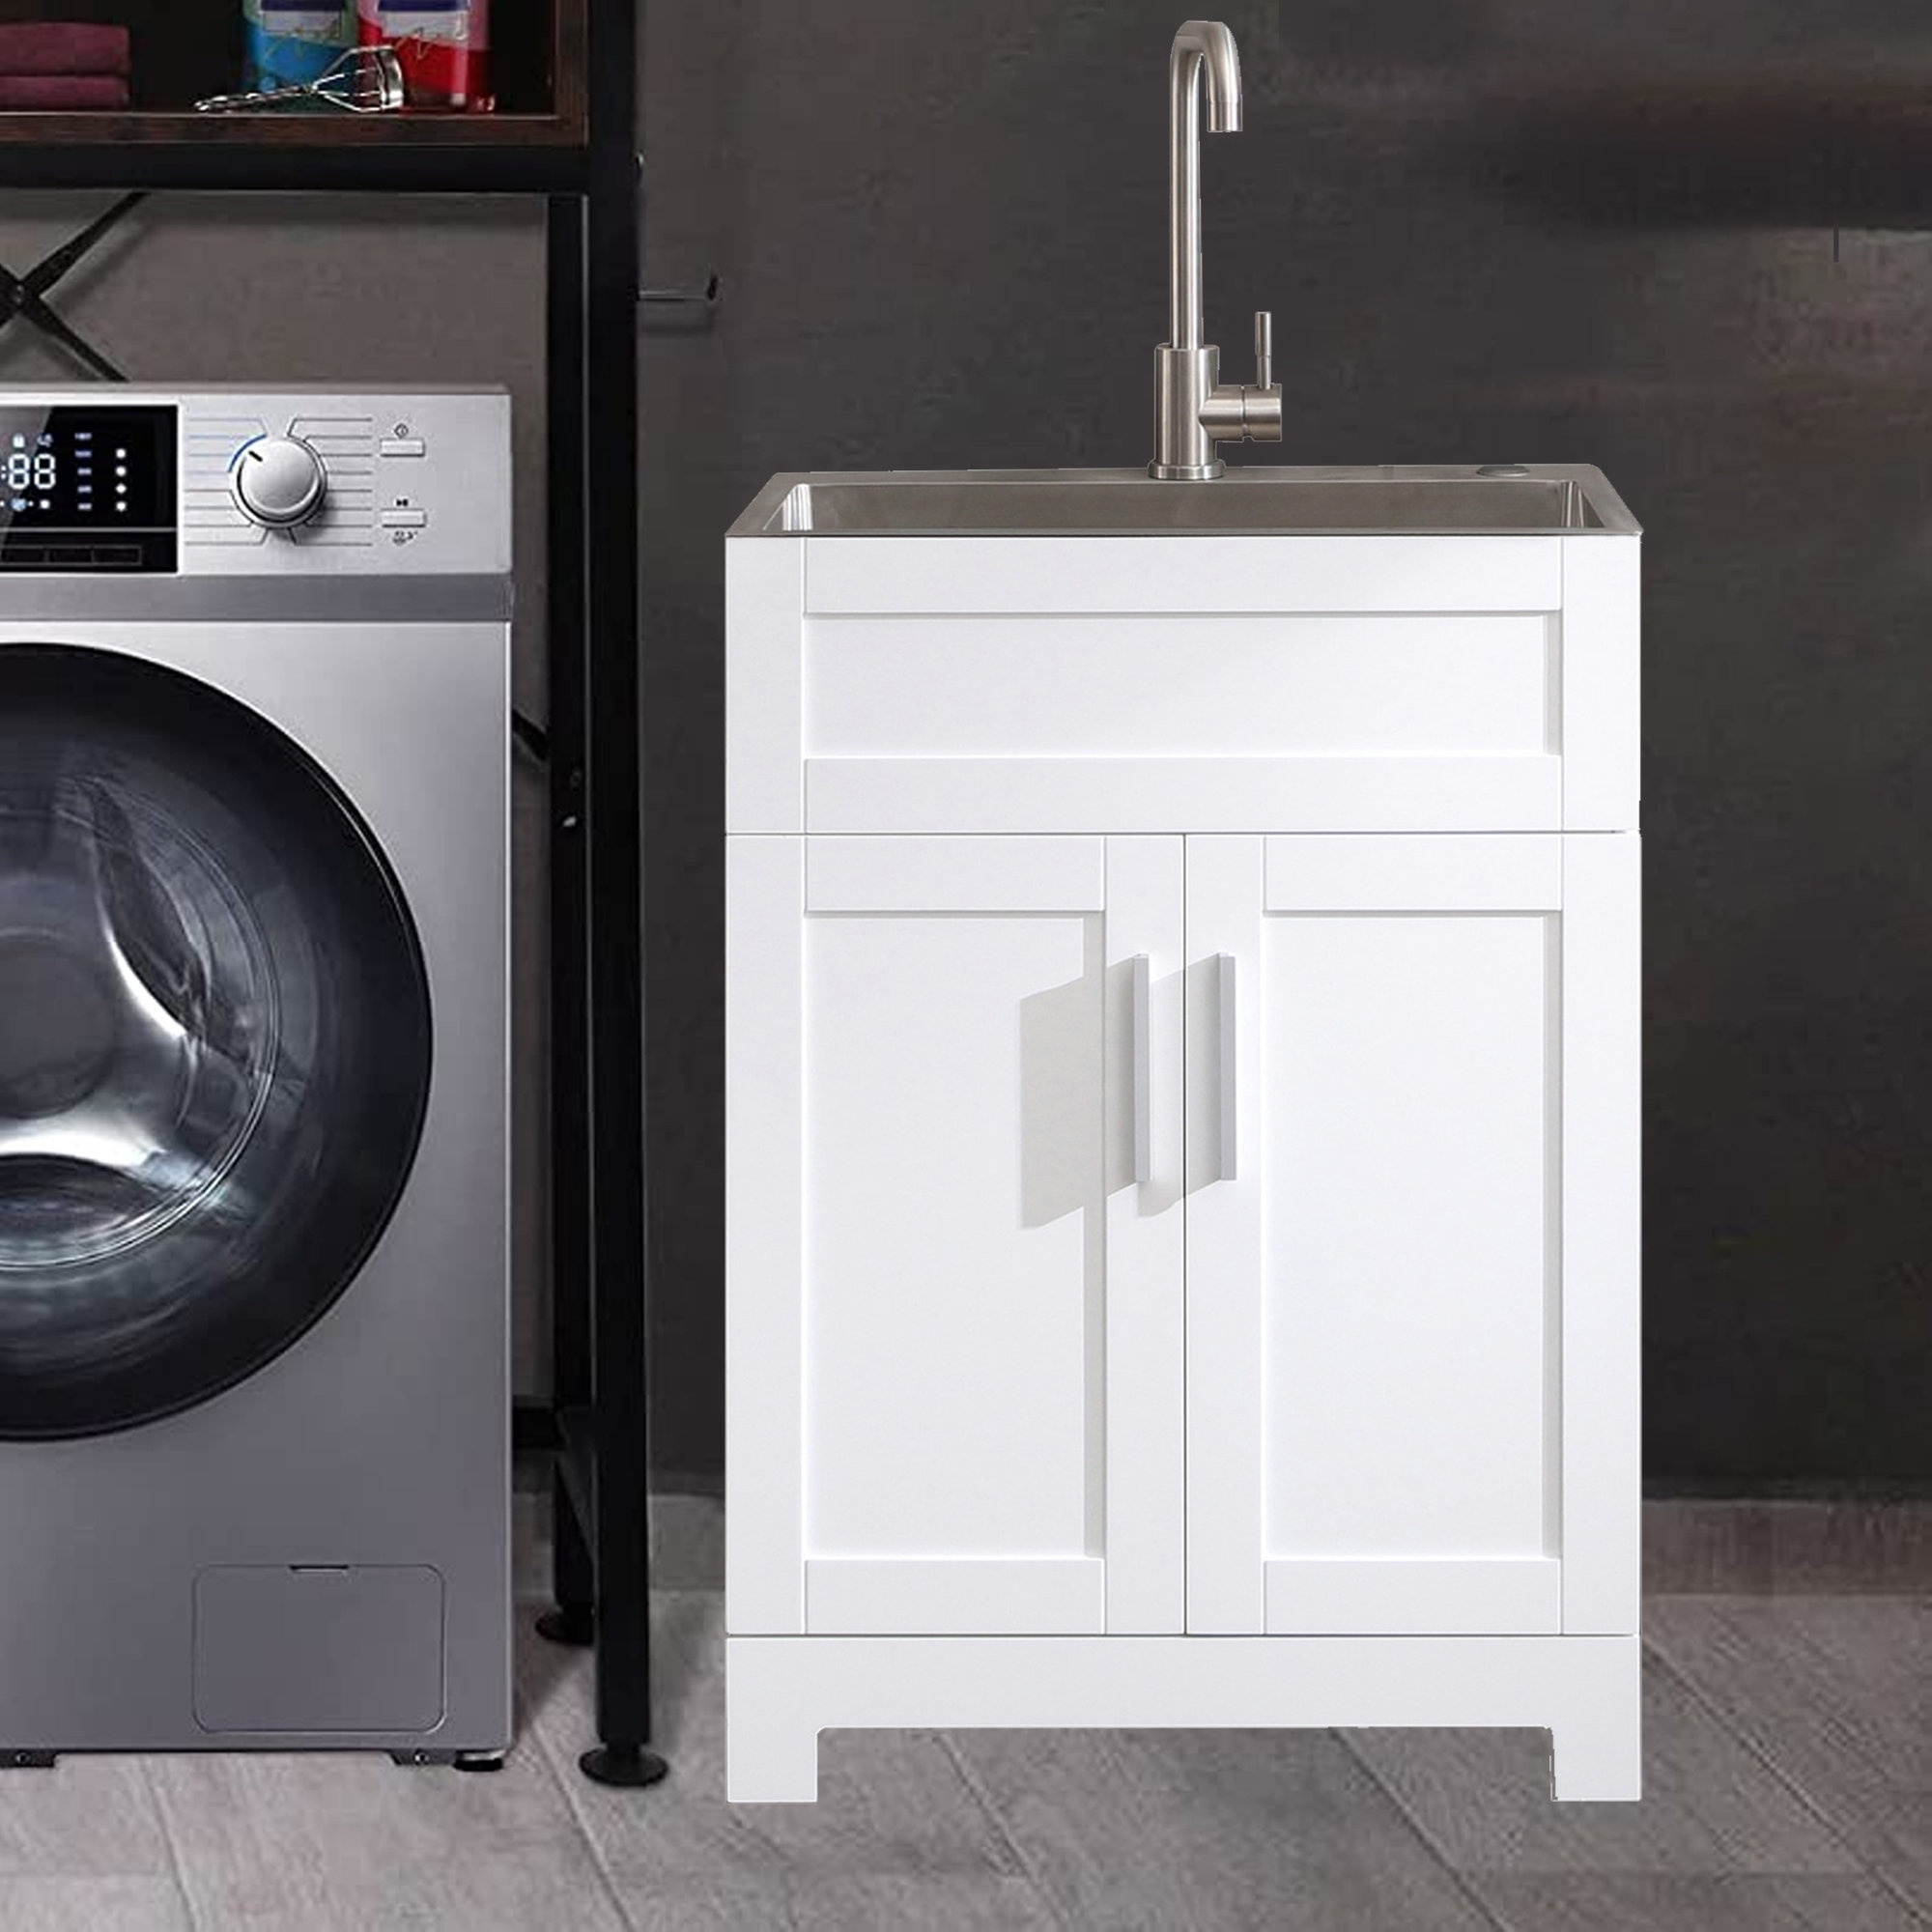 Laundry Room Sink Cabinet Visualhunt